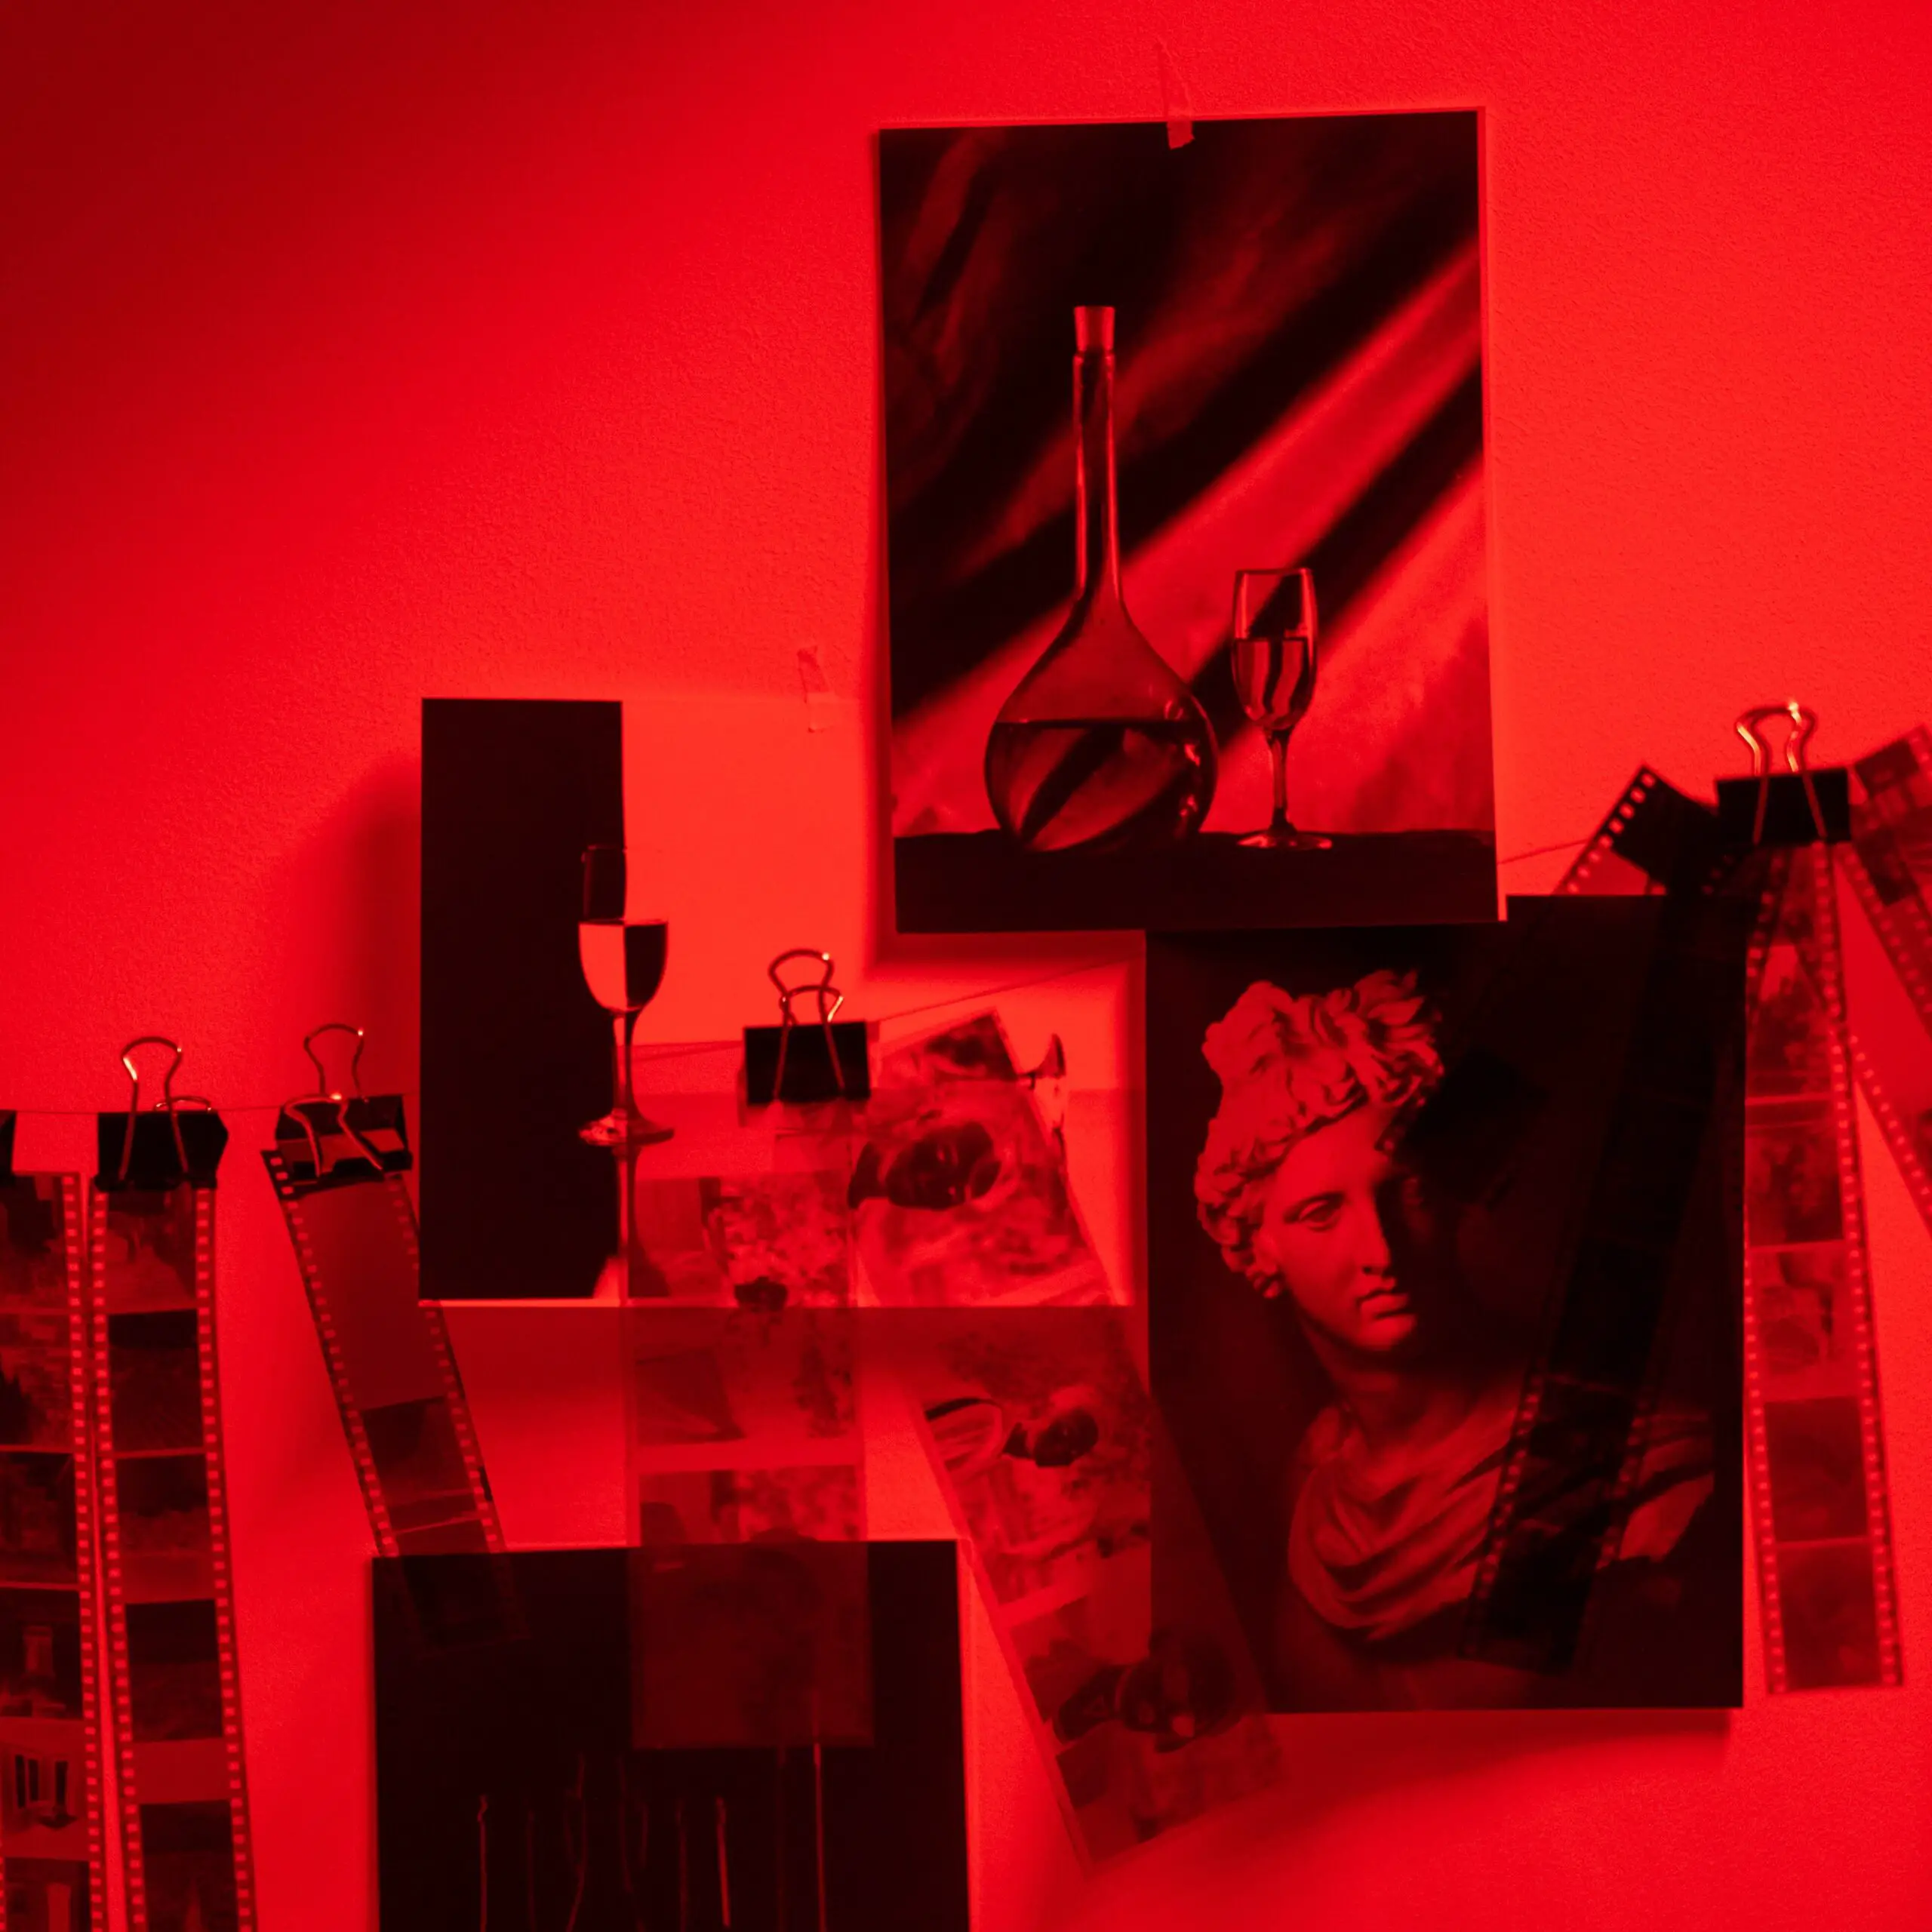 Photographic Darkroom in Red with different prints and negatives on the wall